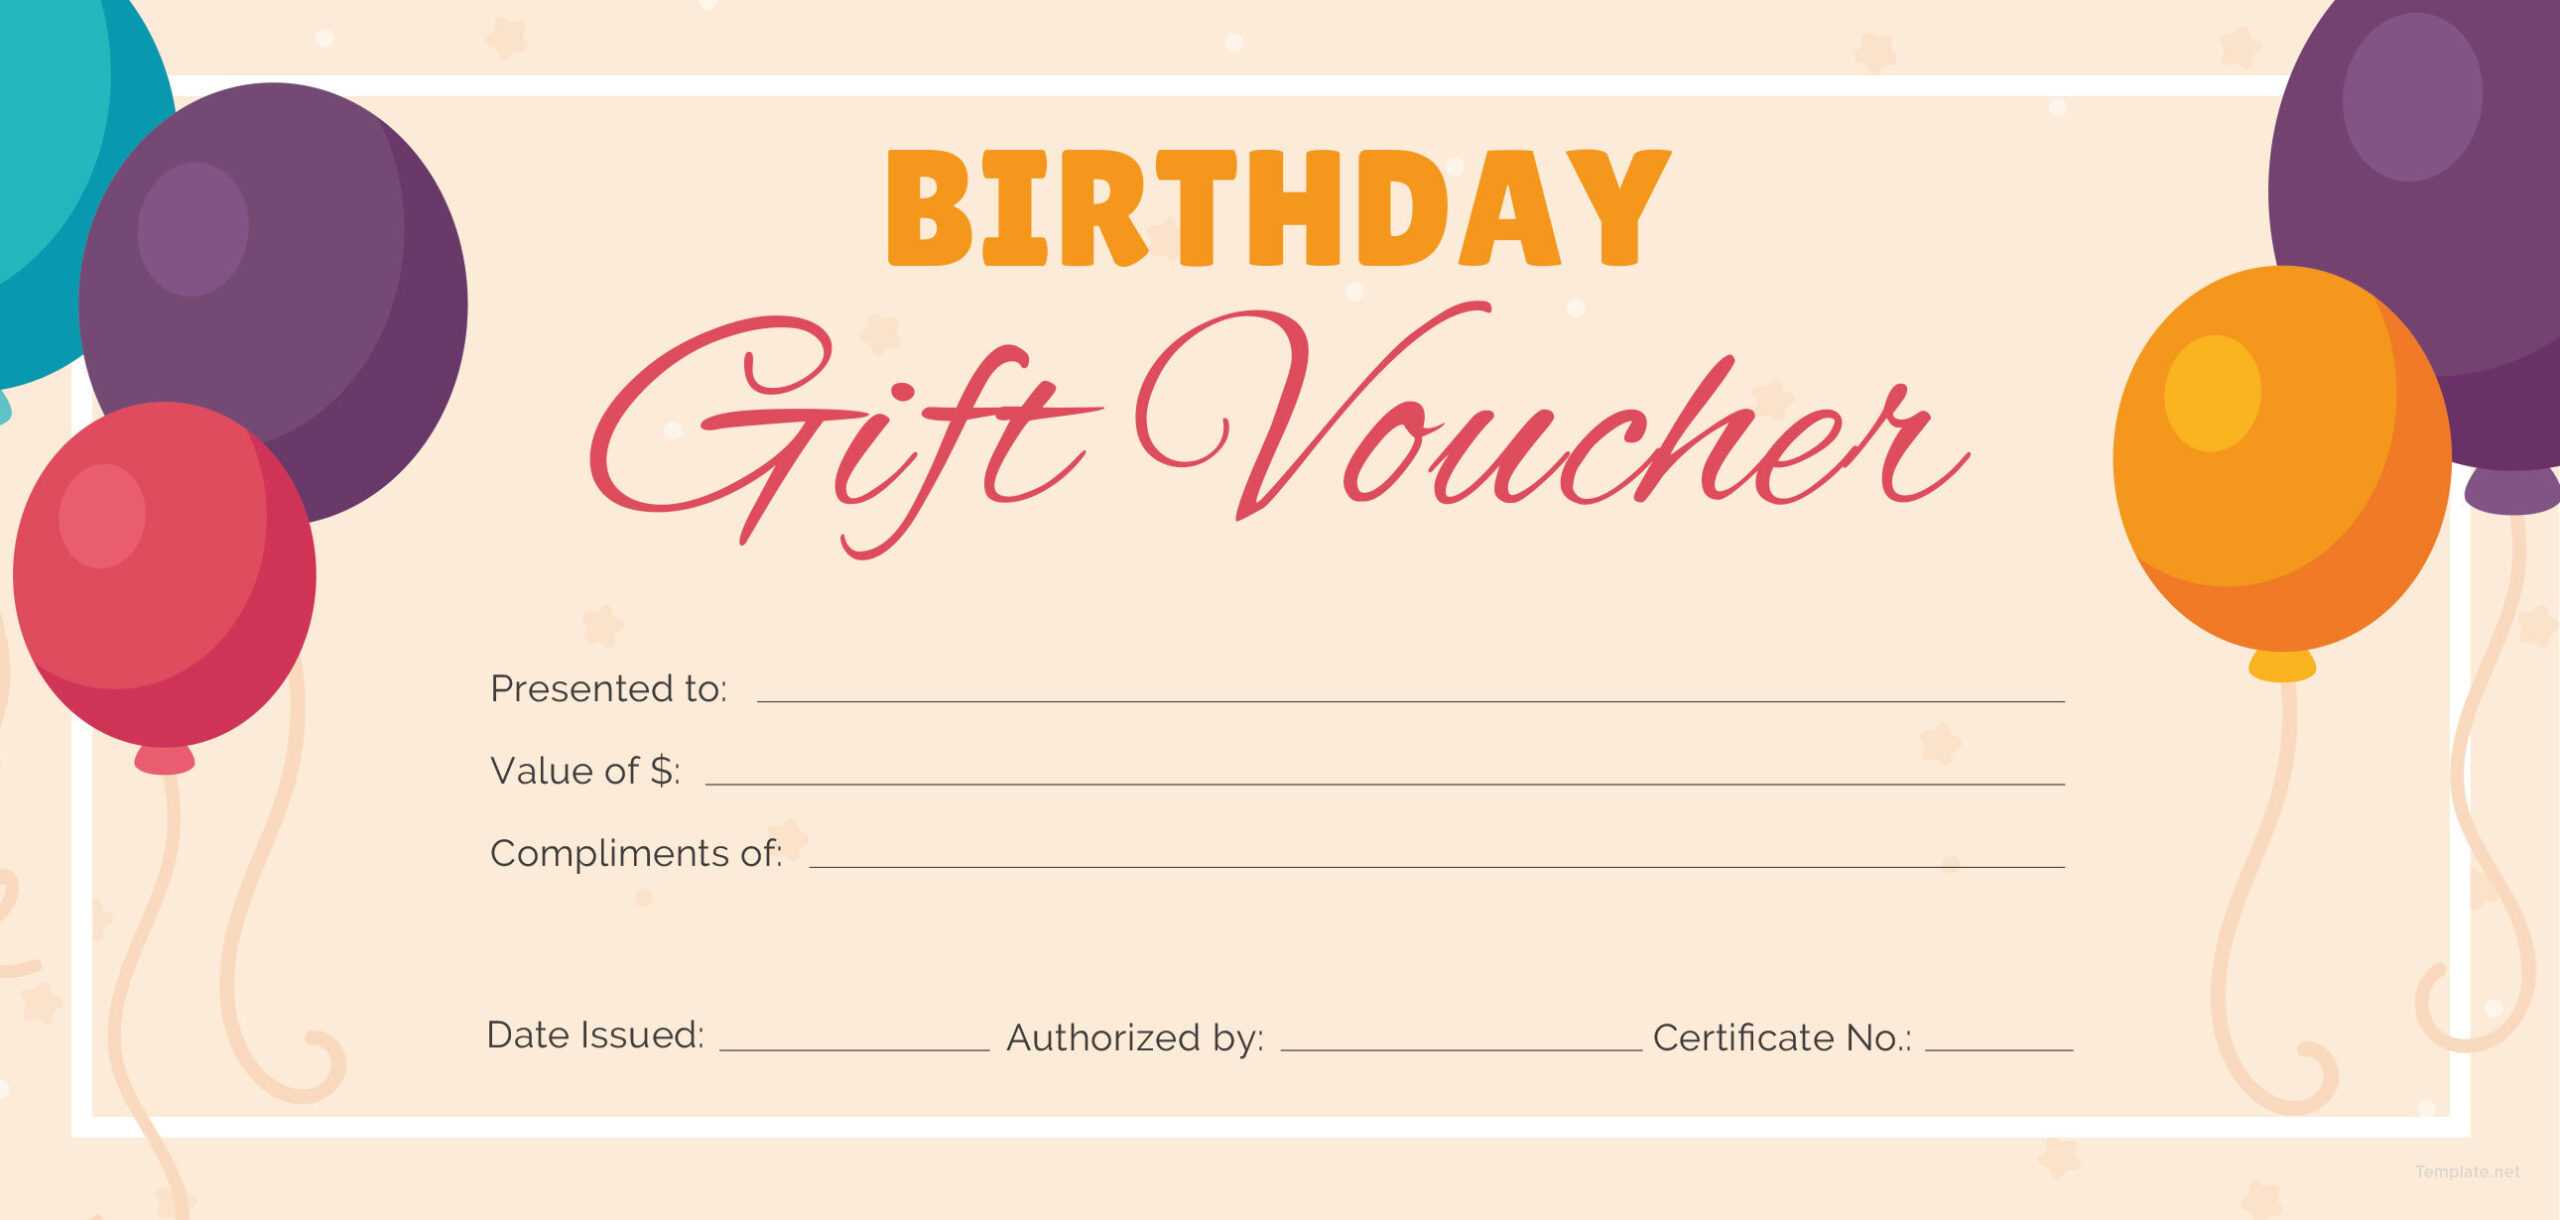 Free Birthday Gift Certificate Templates | Certificate Regarding Track And Field Certificate Templates Free